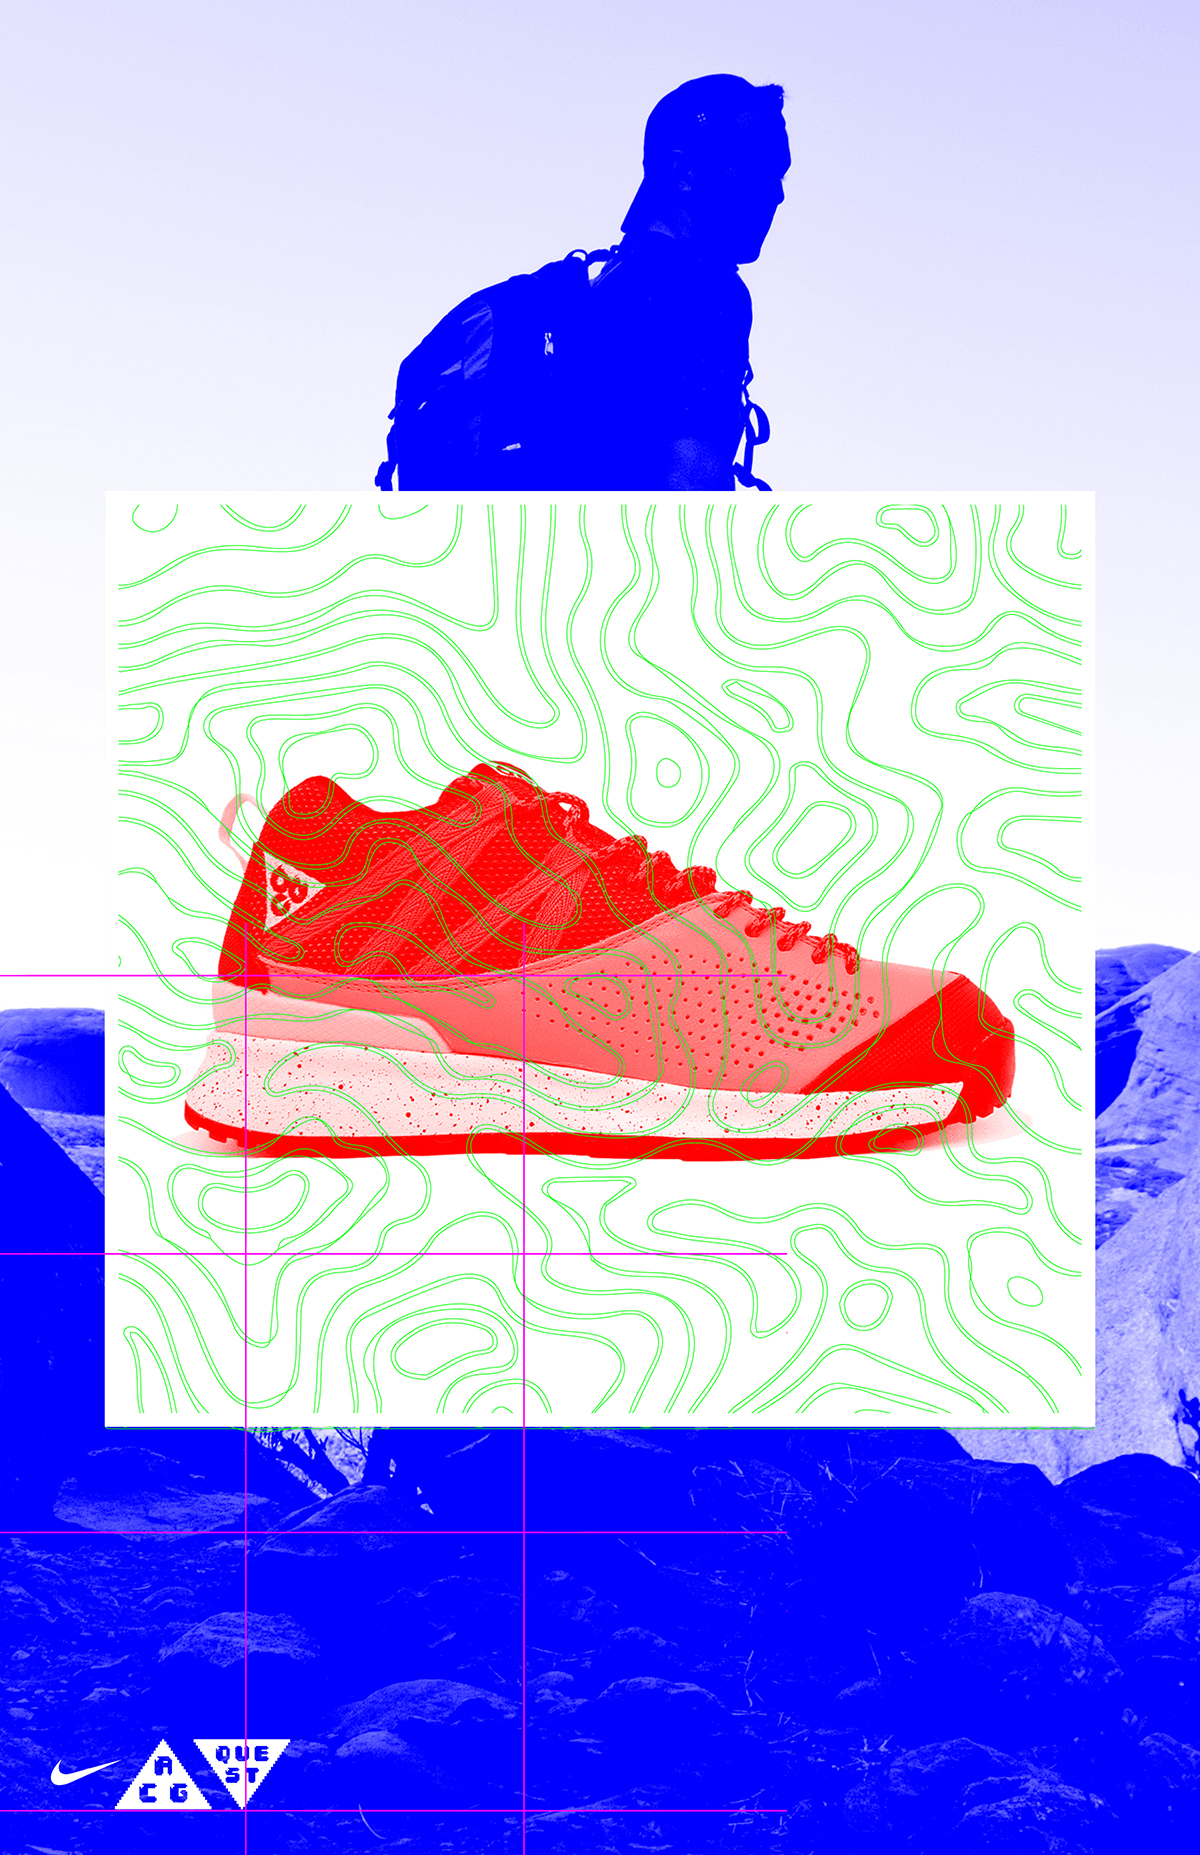 Graphic poster design of a red ACG show with topographical green lines overlaid, and a monochromatic saturated blue image of man hiking in the background. Nike swoosh symbol at bottom left